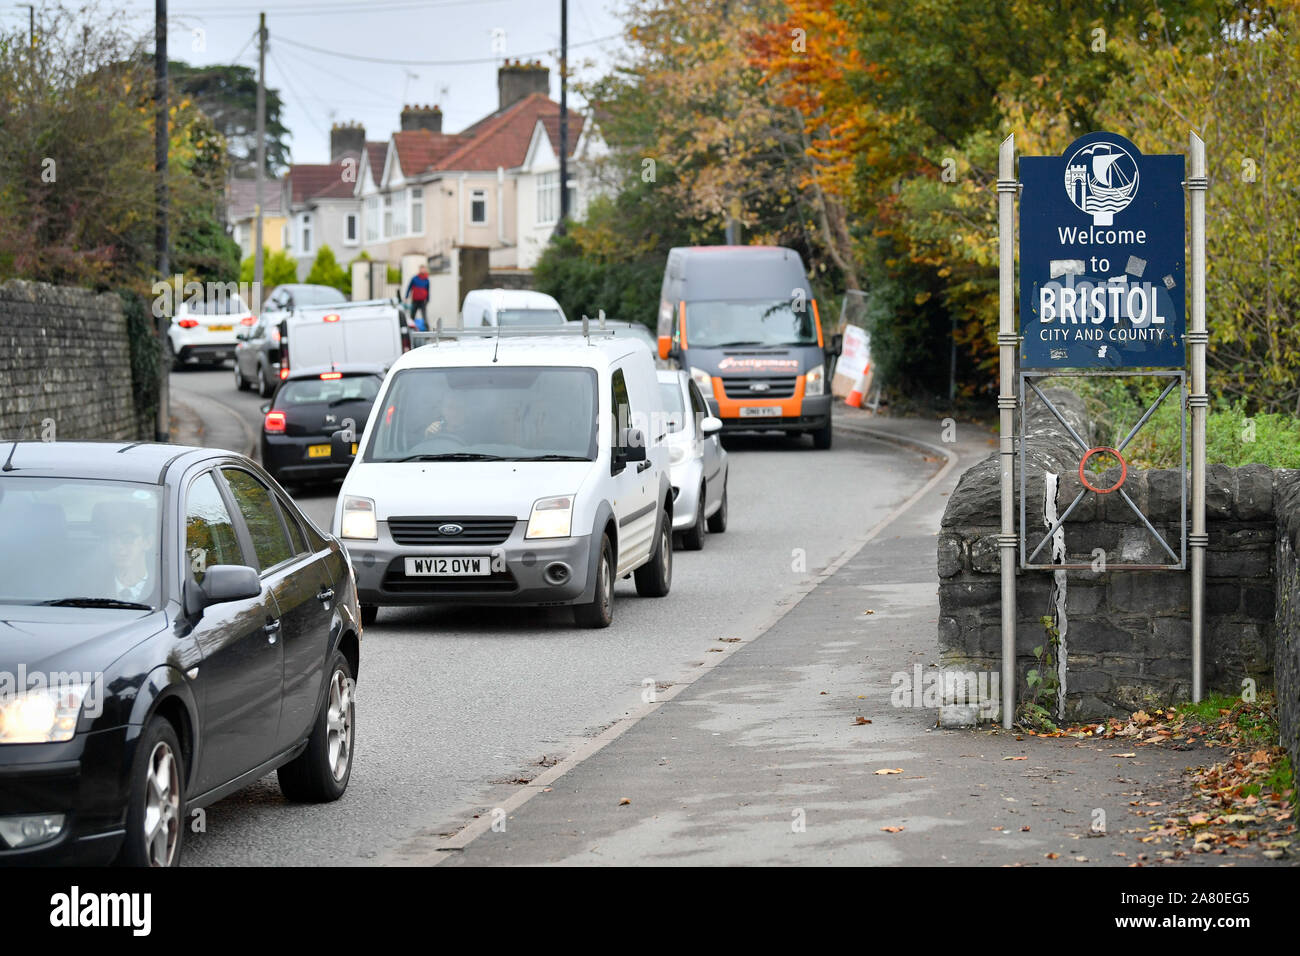 Traffic leaves and enters Bristol, which could become the UK's first city to introduce a ban on diesel vehicles to boost air quality following a vote by the council's cabinet which is being asked to approve the Clean Air Zone proposal at a meeting on November 5. PA Photo. Picture date: Tuesday November 5, 2019. The vehicles will be prohibited from entering a central area of the city between 7am and 3pm every day under proposals by Bristol City Council. A wider charging zone for commercial vehicles such as buses, taxis, vans and lorries which do not meet certain emissions standards is part of Stock Photo